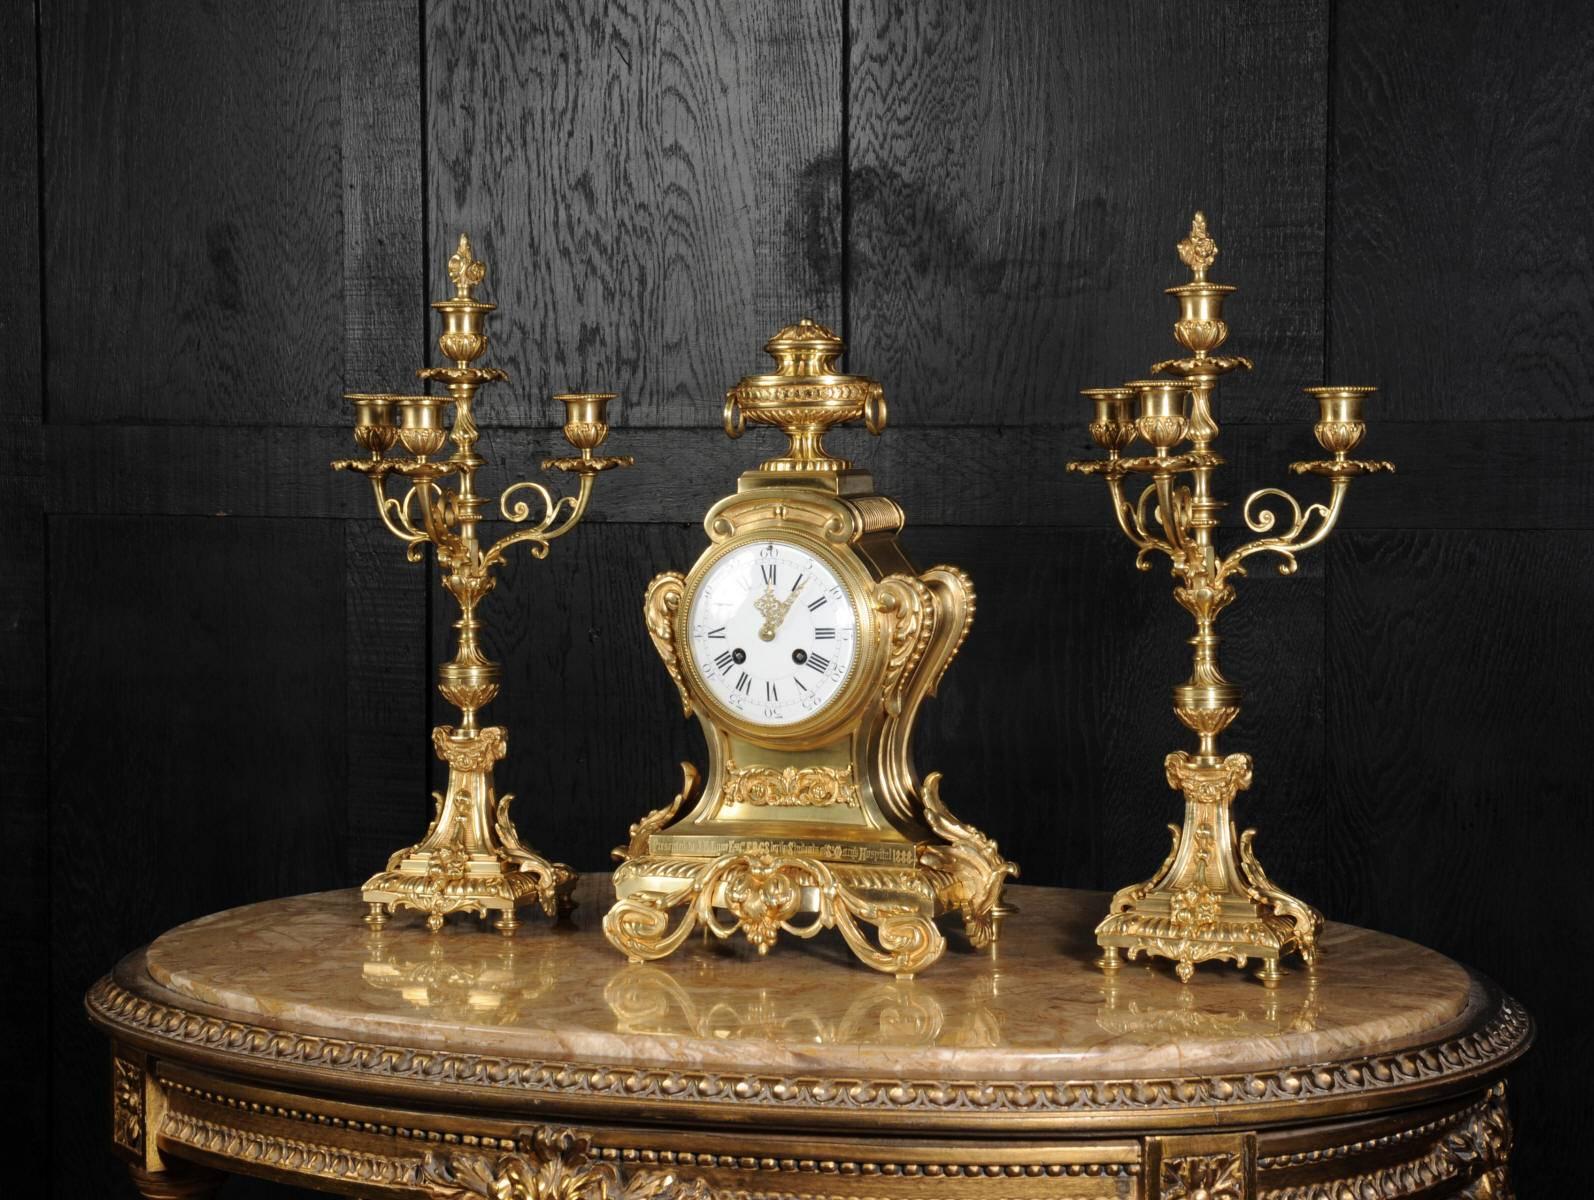 A beautiful, fully working, original antique French bronze clock set dating from circa 1888. It is modelled in the Louis XVI style, restrained and chic with a waisted case decorated with floral and acanthus decoration.

Candelabra have three